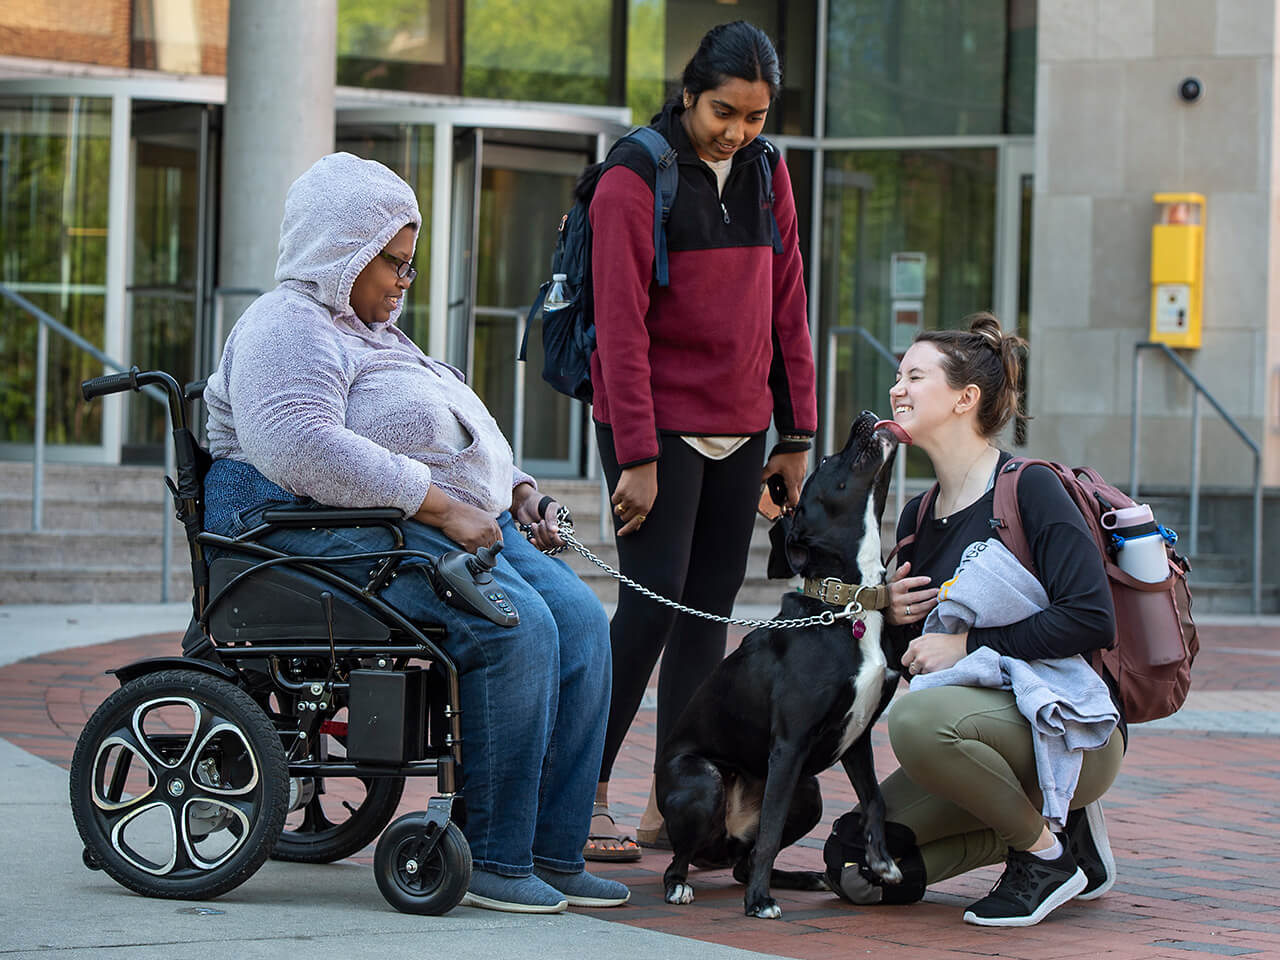 Students having a conversation with a service dog and owner